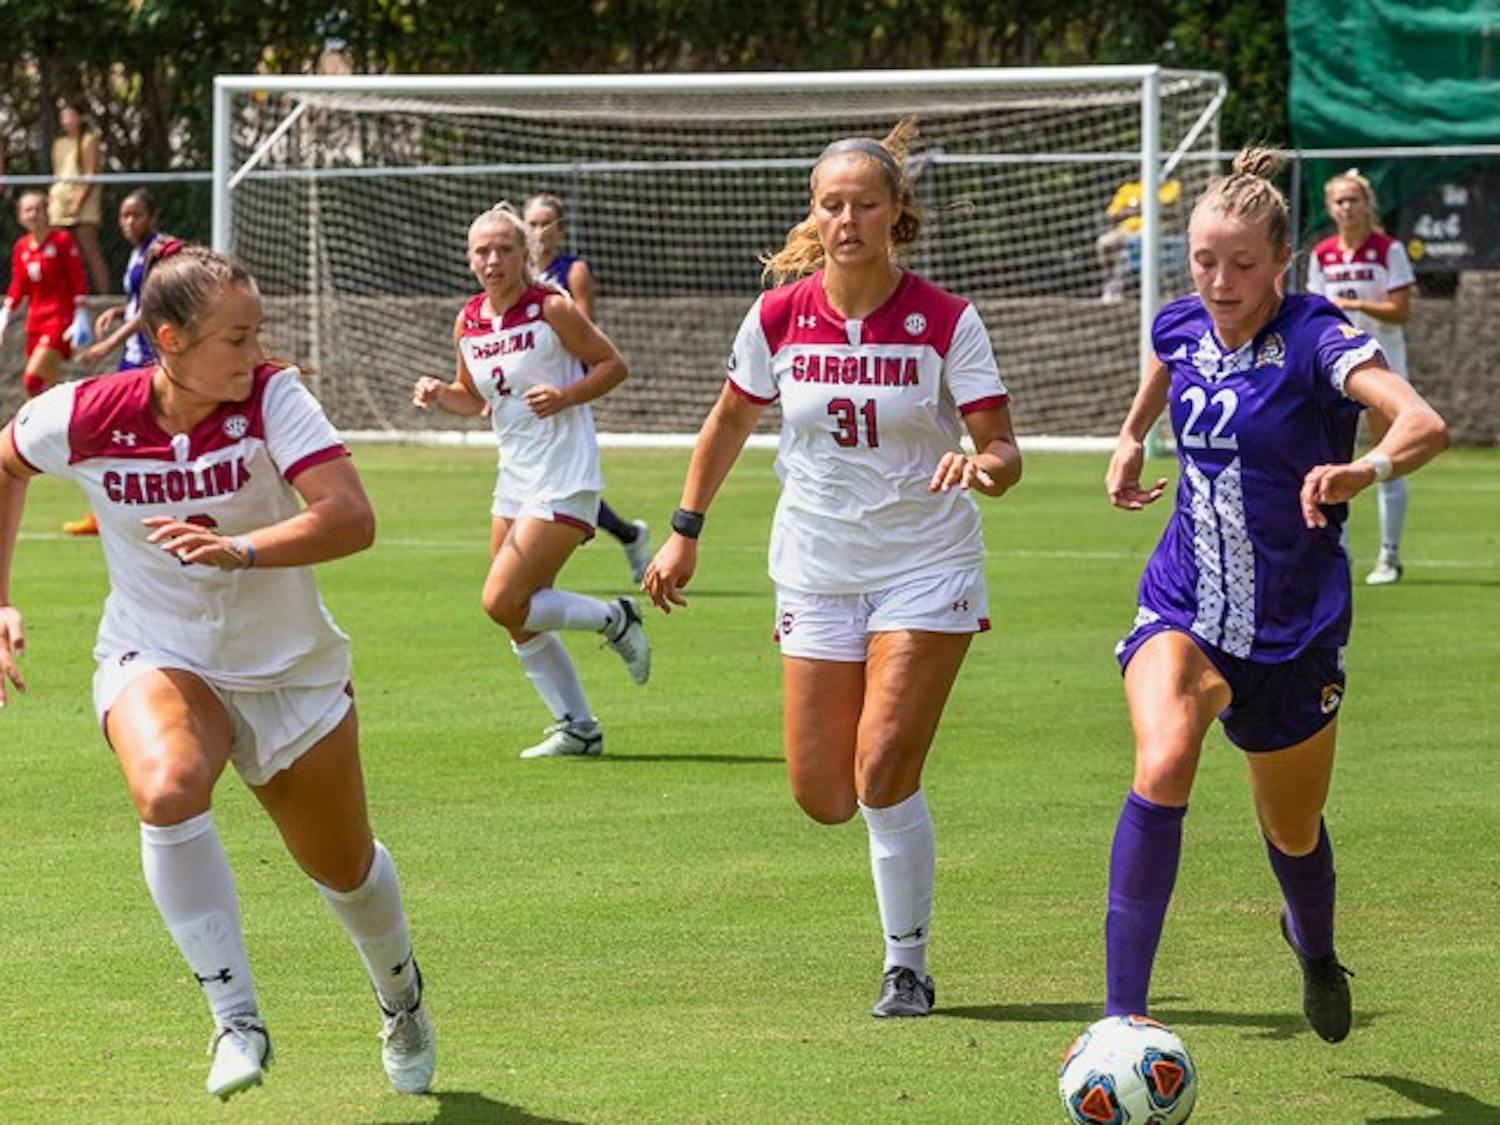 Eastern Carolina Junior Forward Sydney Schnell kicks the ball down the field as the Gamecocks attempt to take the ball on August 21, 2022. South Carolina beat Eastern Carolina 2-0.&nbsp;